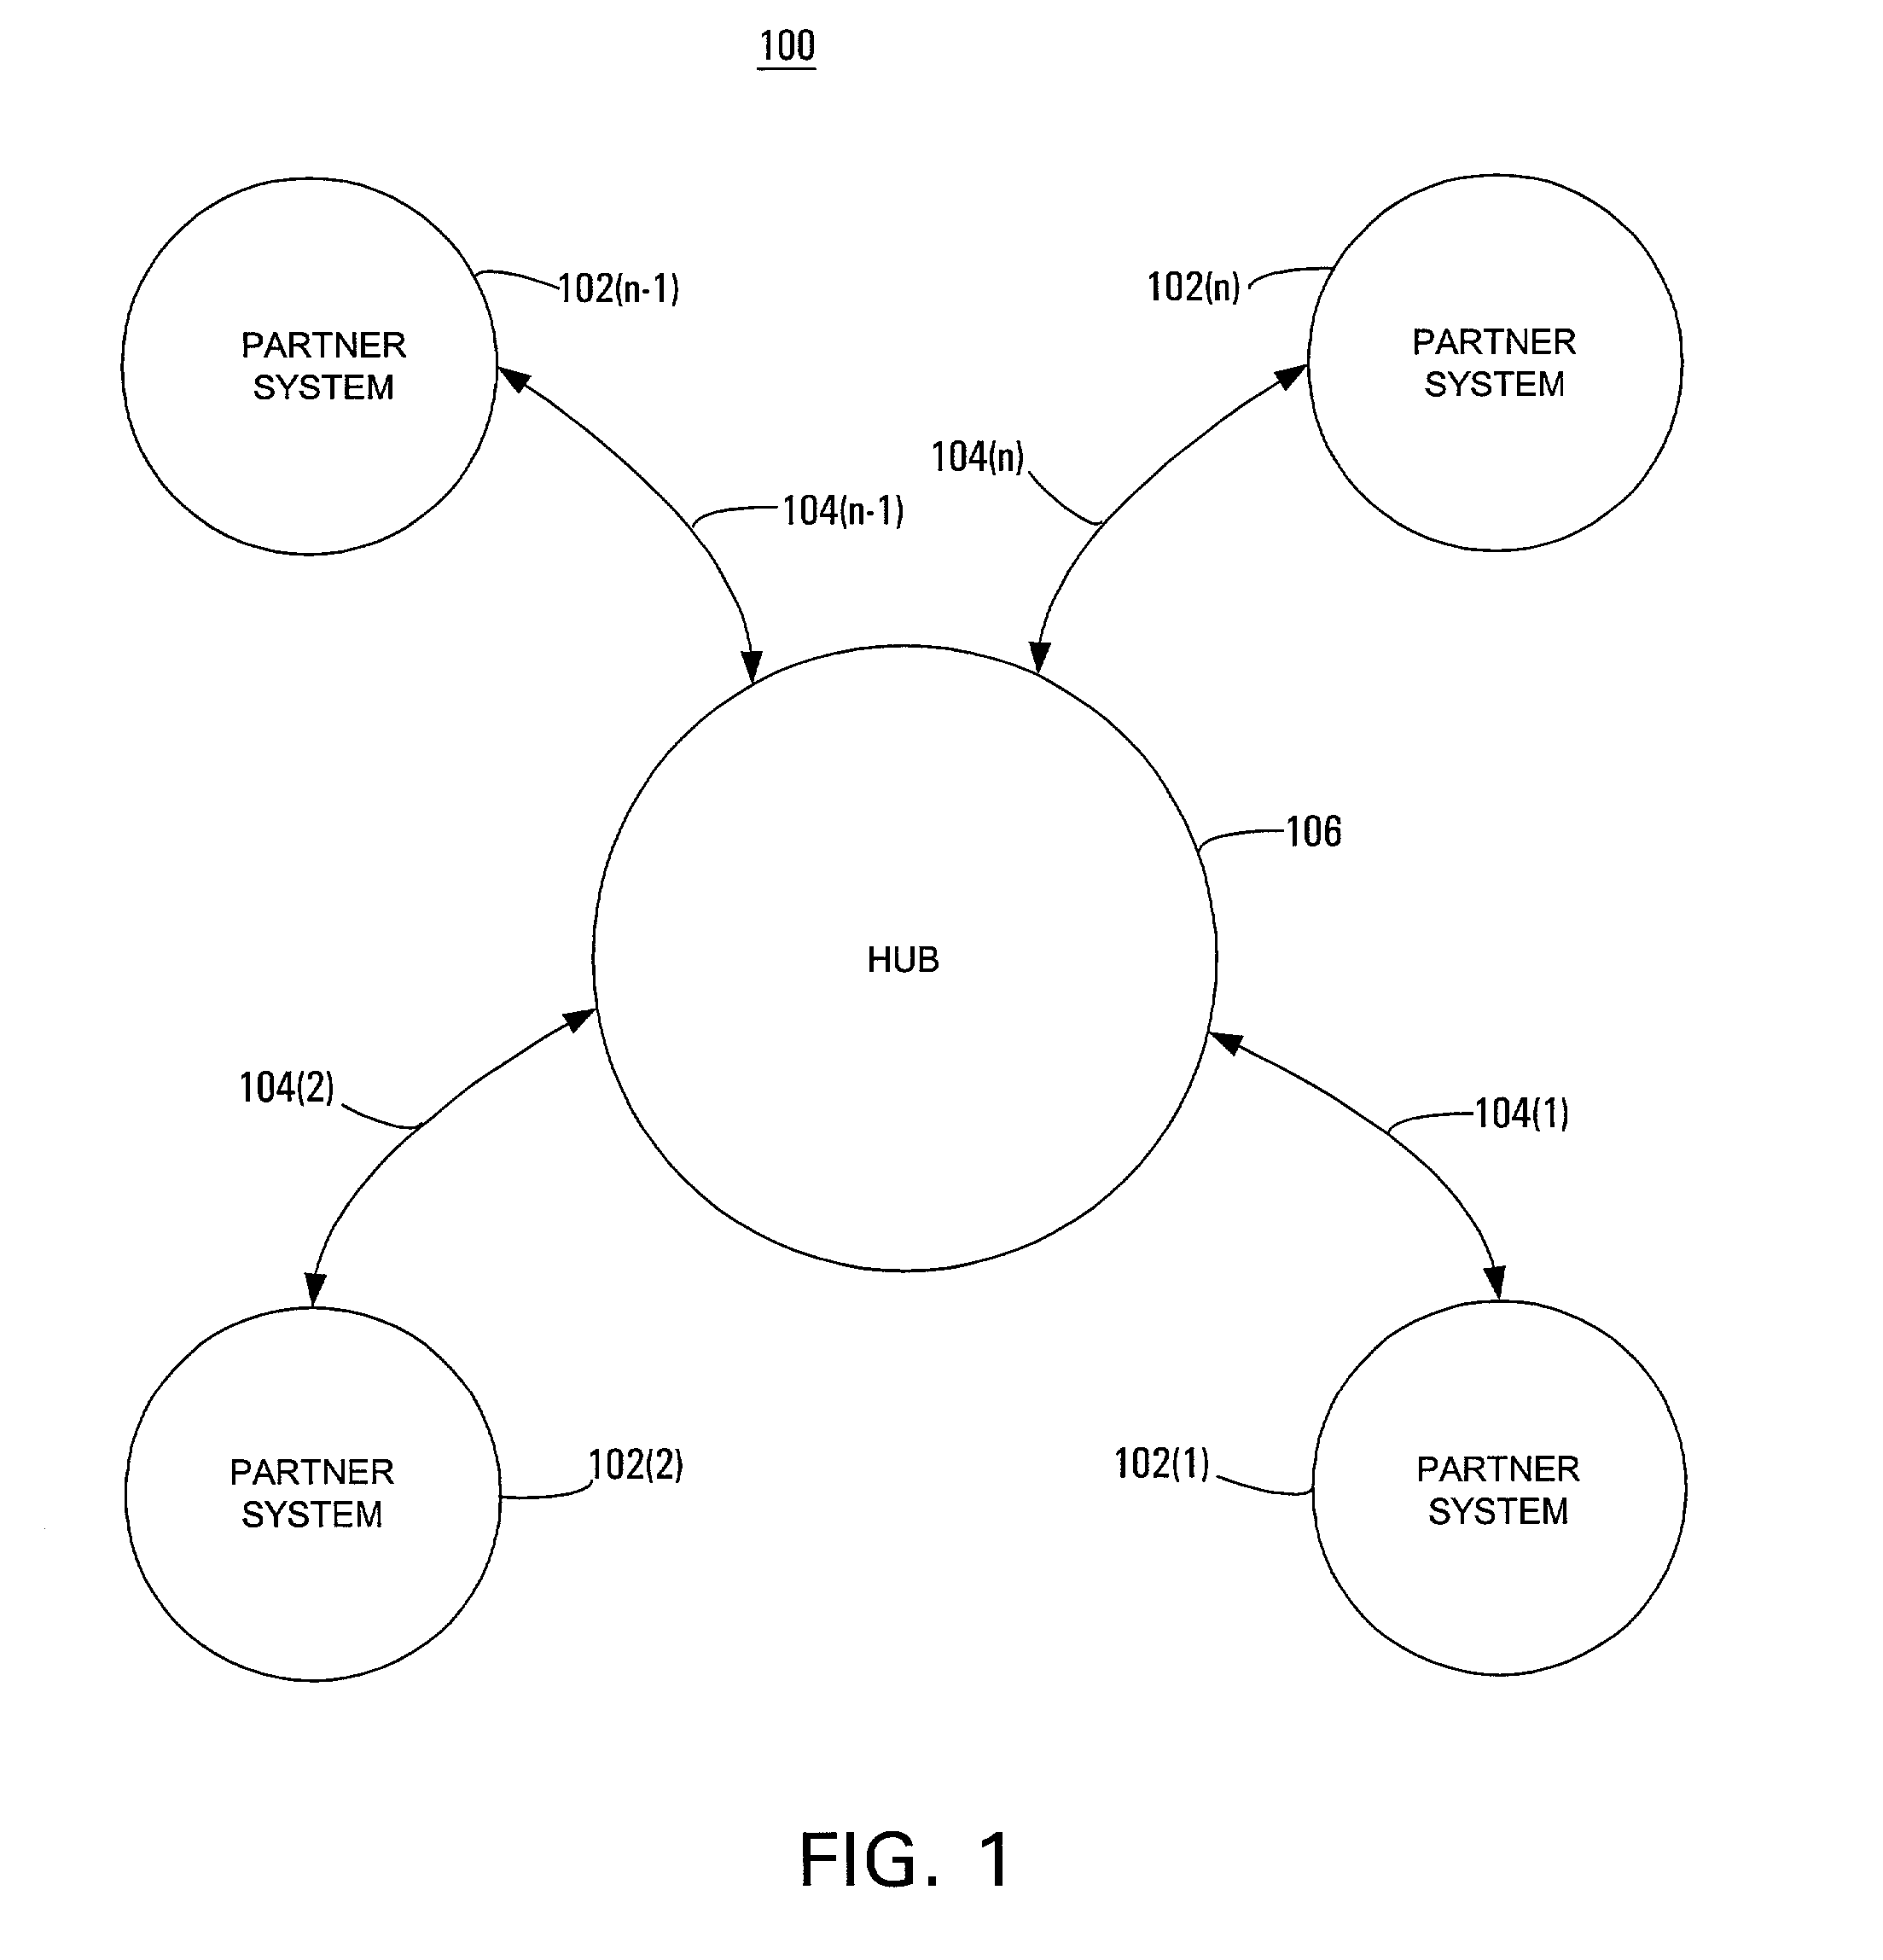 Method and system for manging multiple interpretations for a single agreement in a multilateral environment